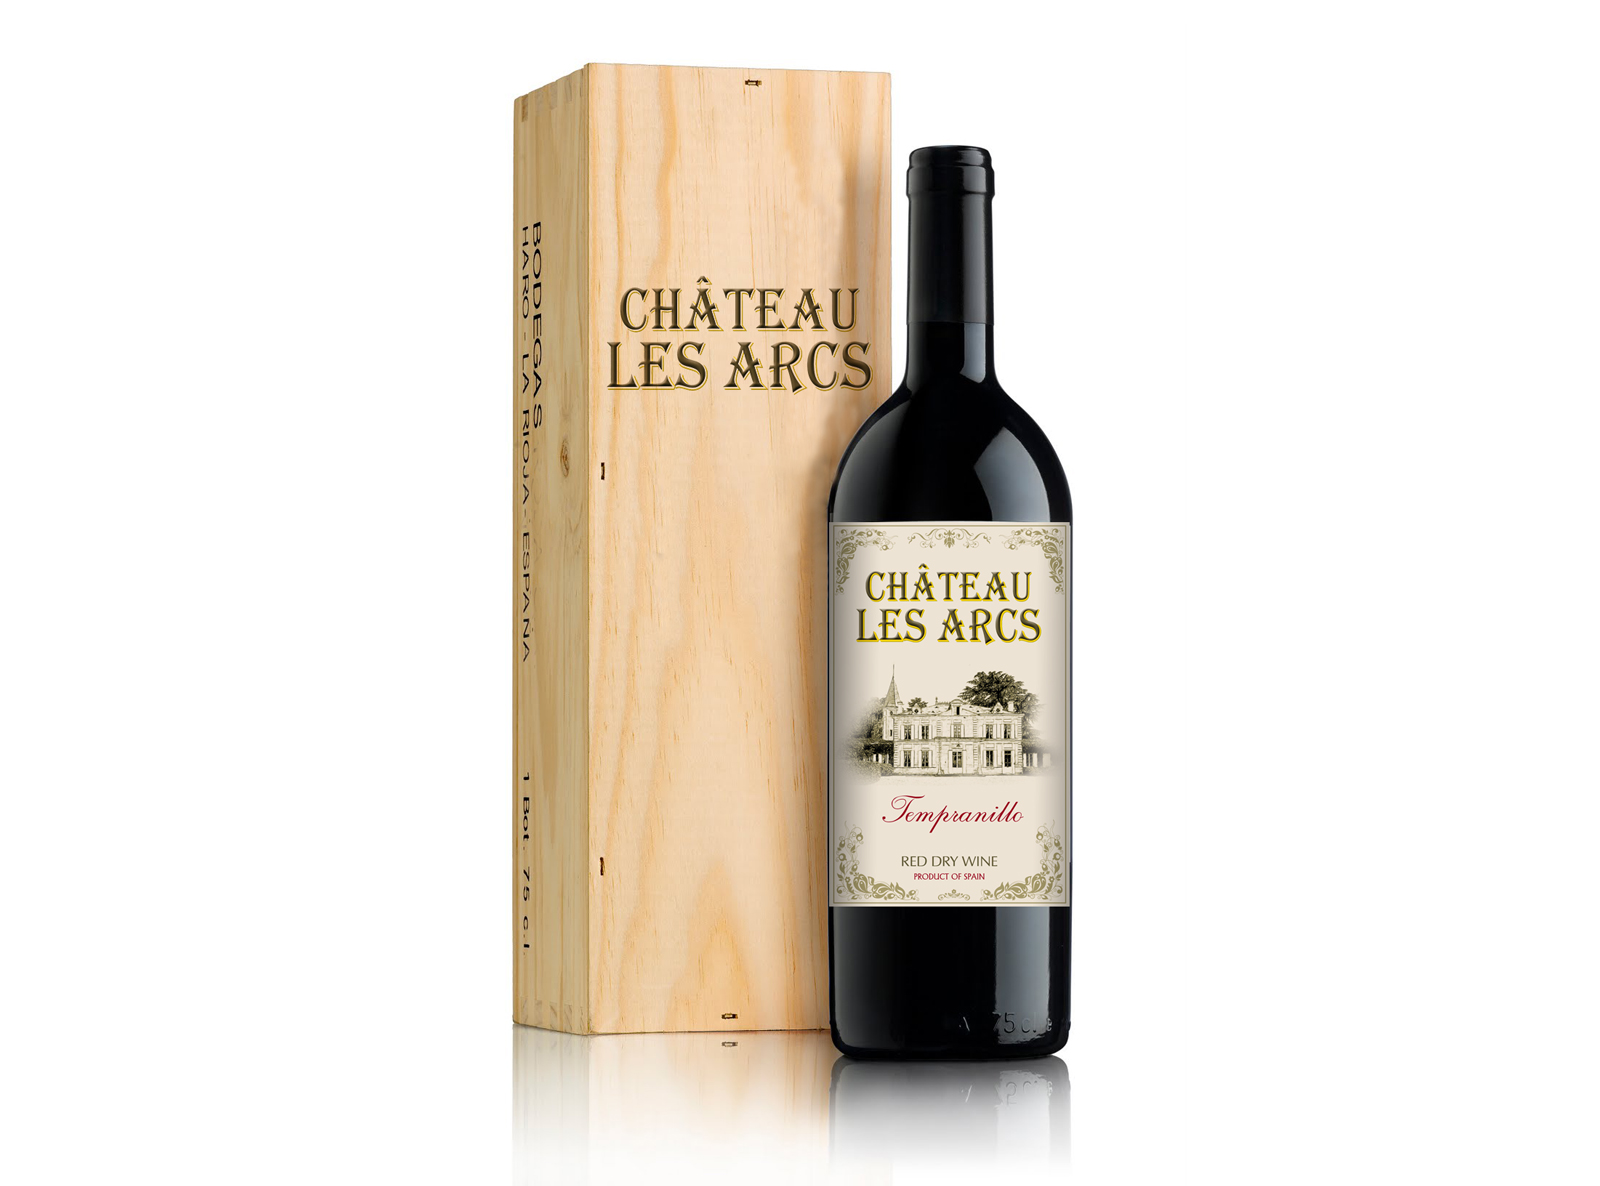 Portfolio of graphic and creative design works wine labels and packaging for wine CHATEAU LES ARCS